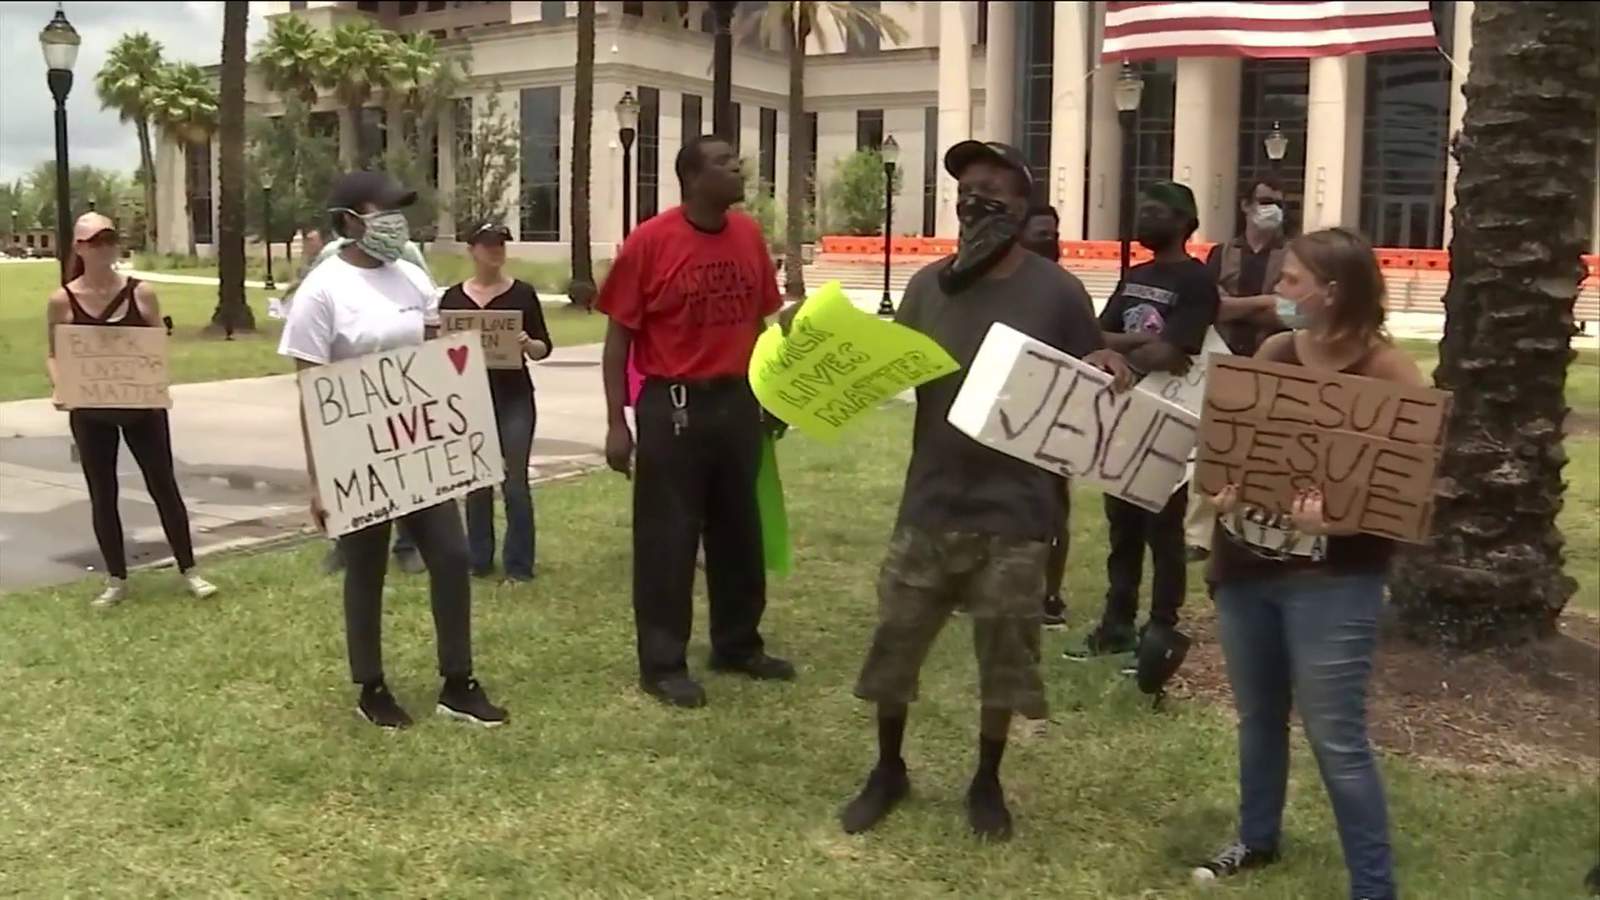 Dozens march peacefully at Duval County courthouse again, demanding end to police brutality